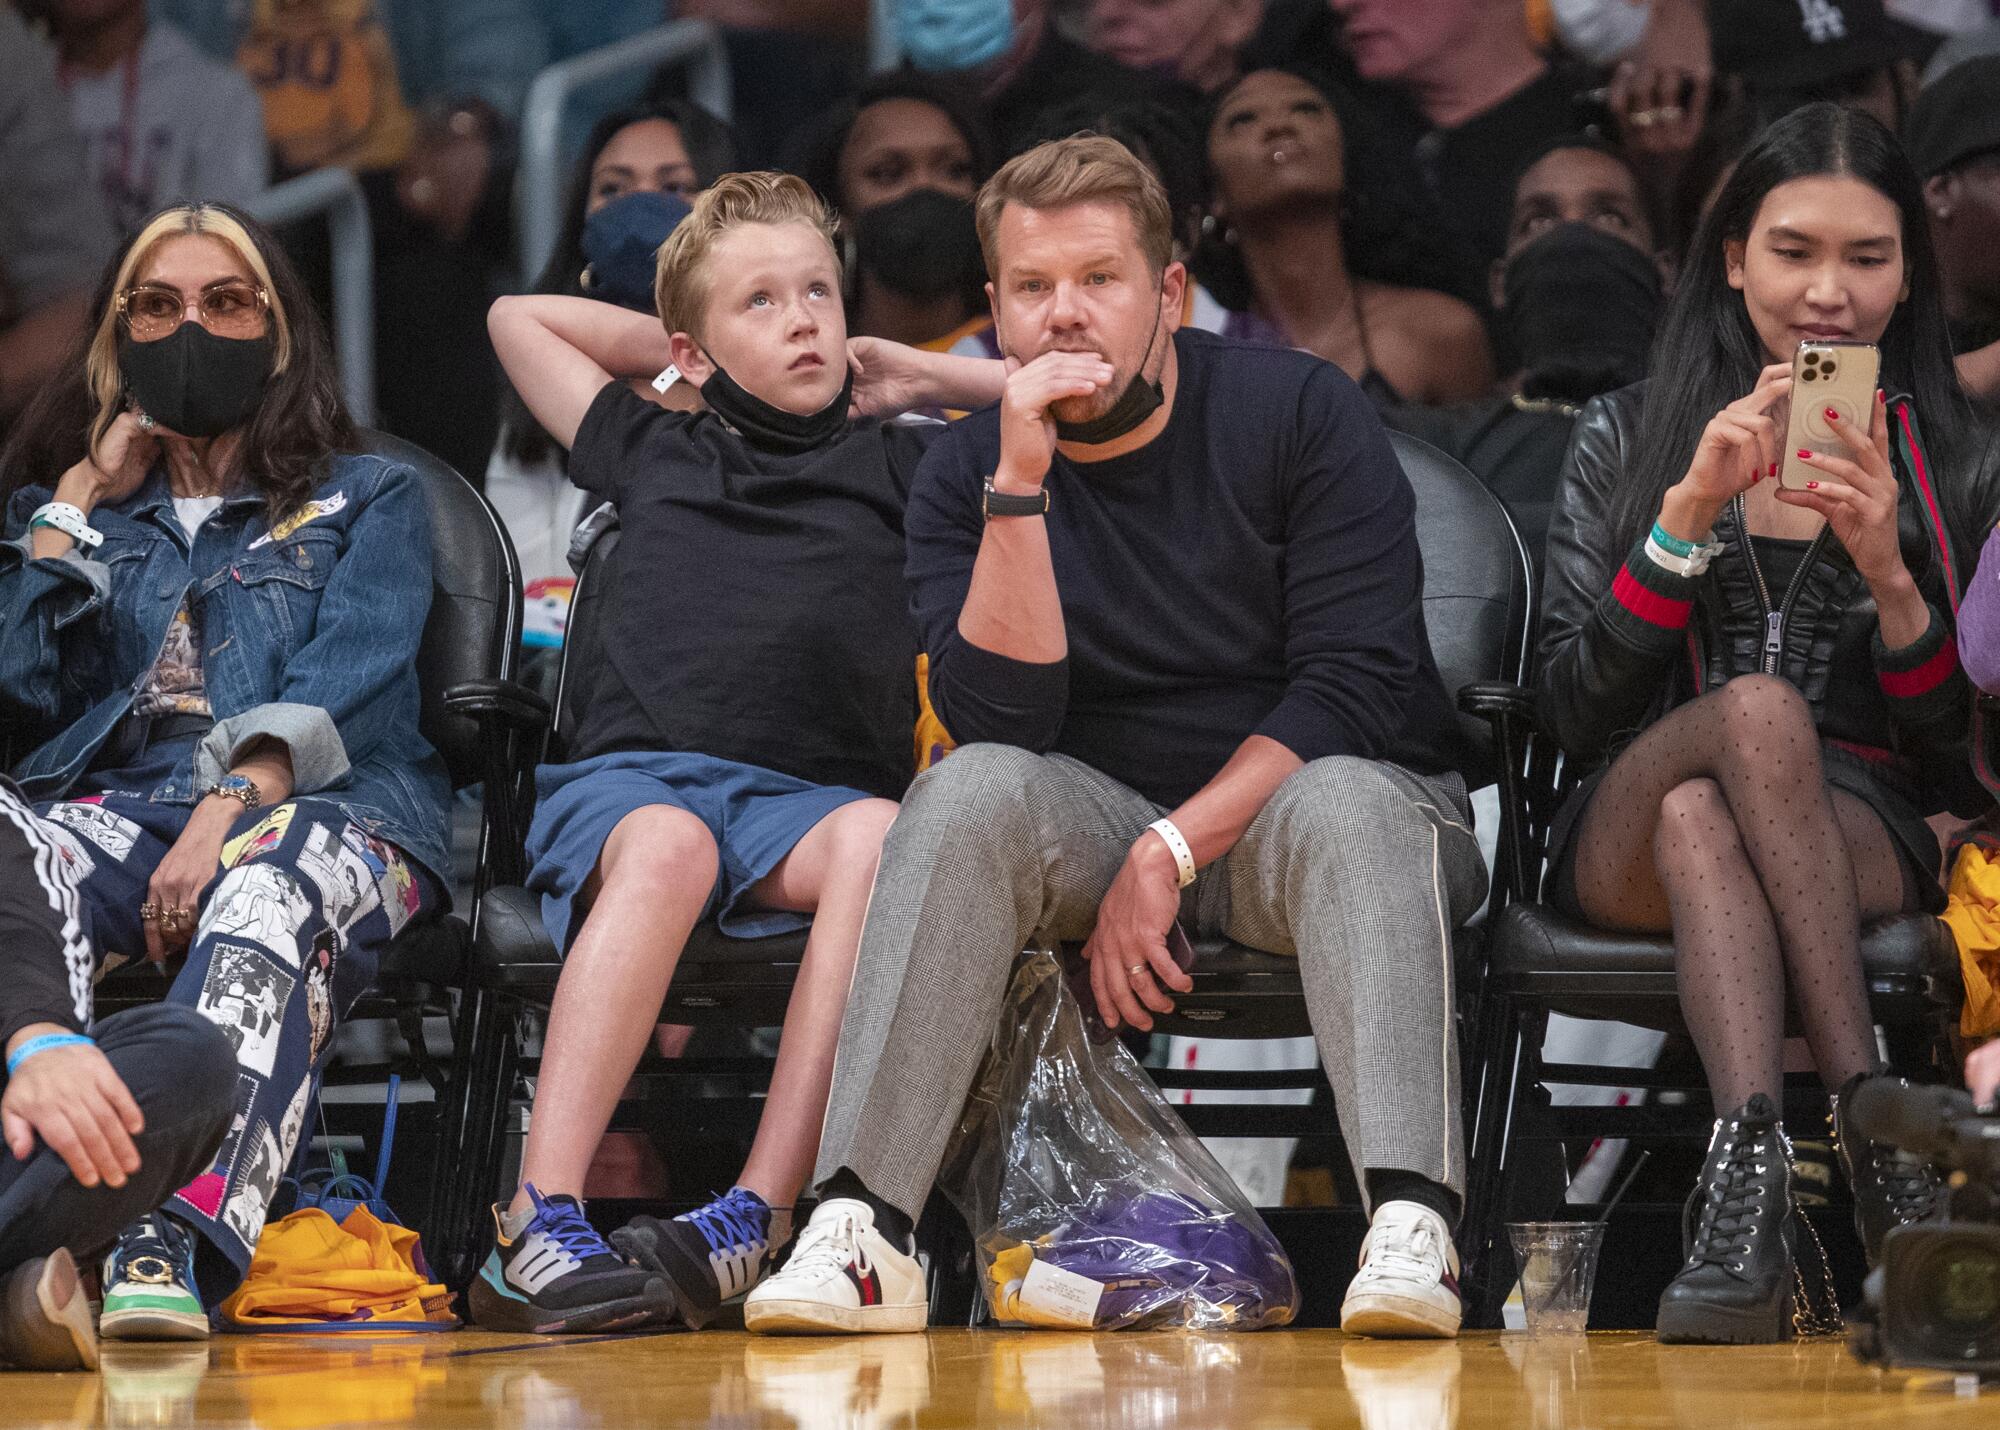 James Corden and his son, Max Corden, watch the Lakers.